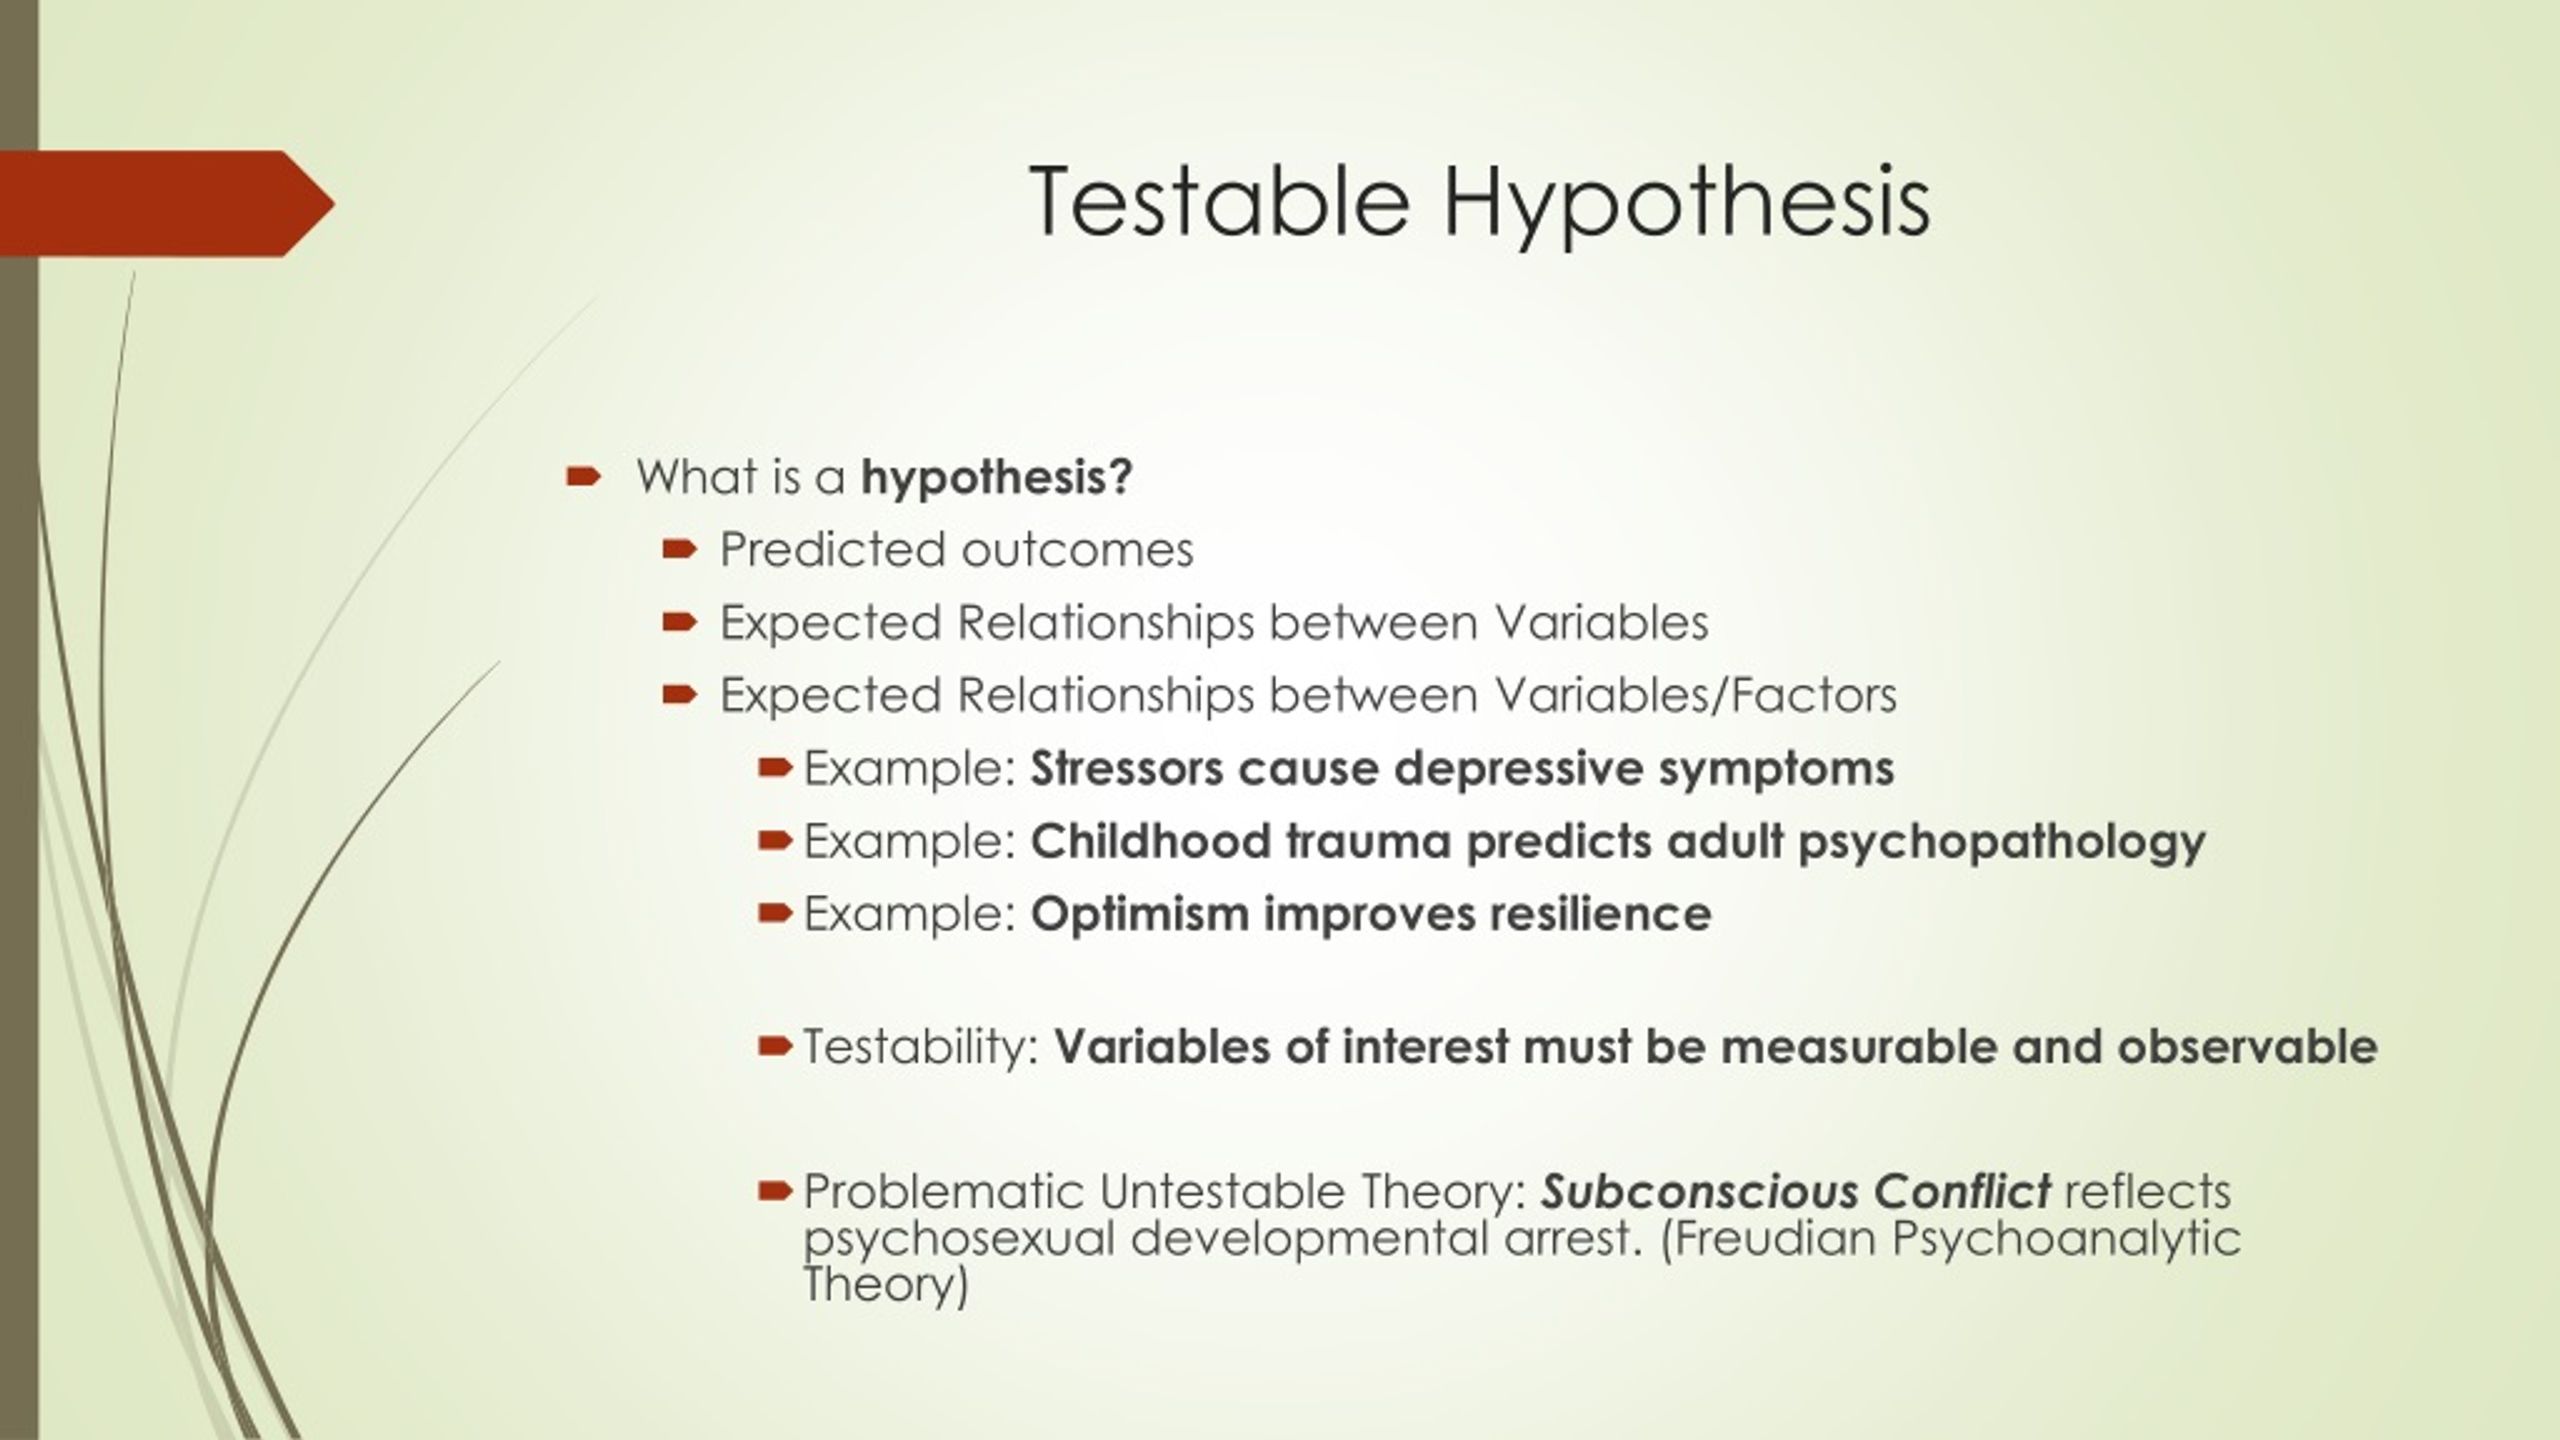 statement is testable hypothesis